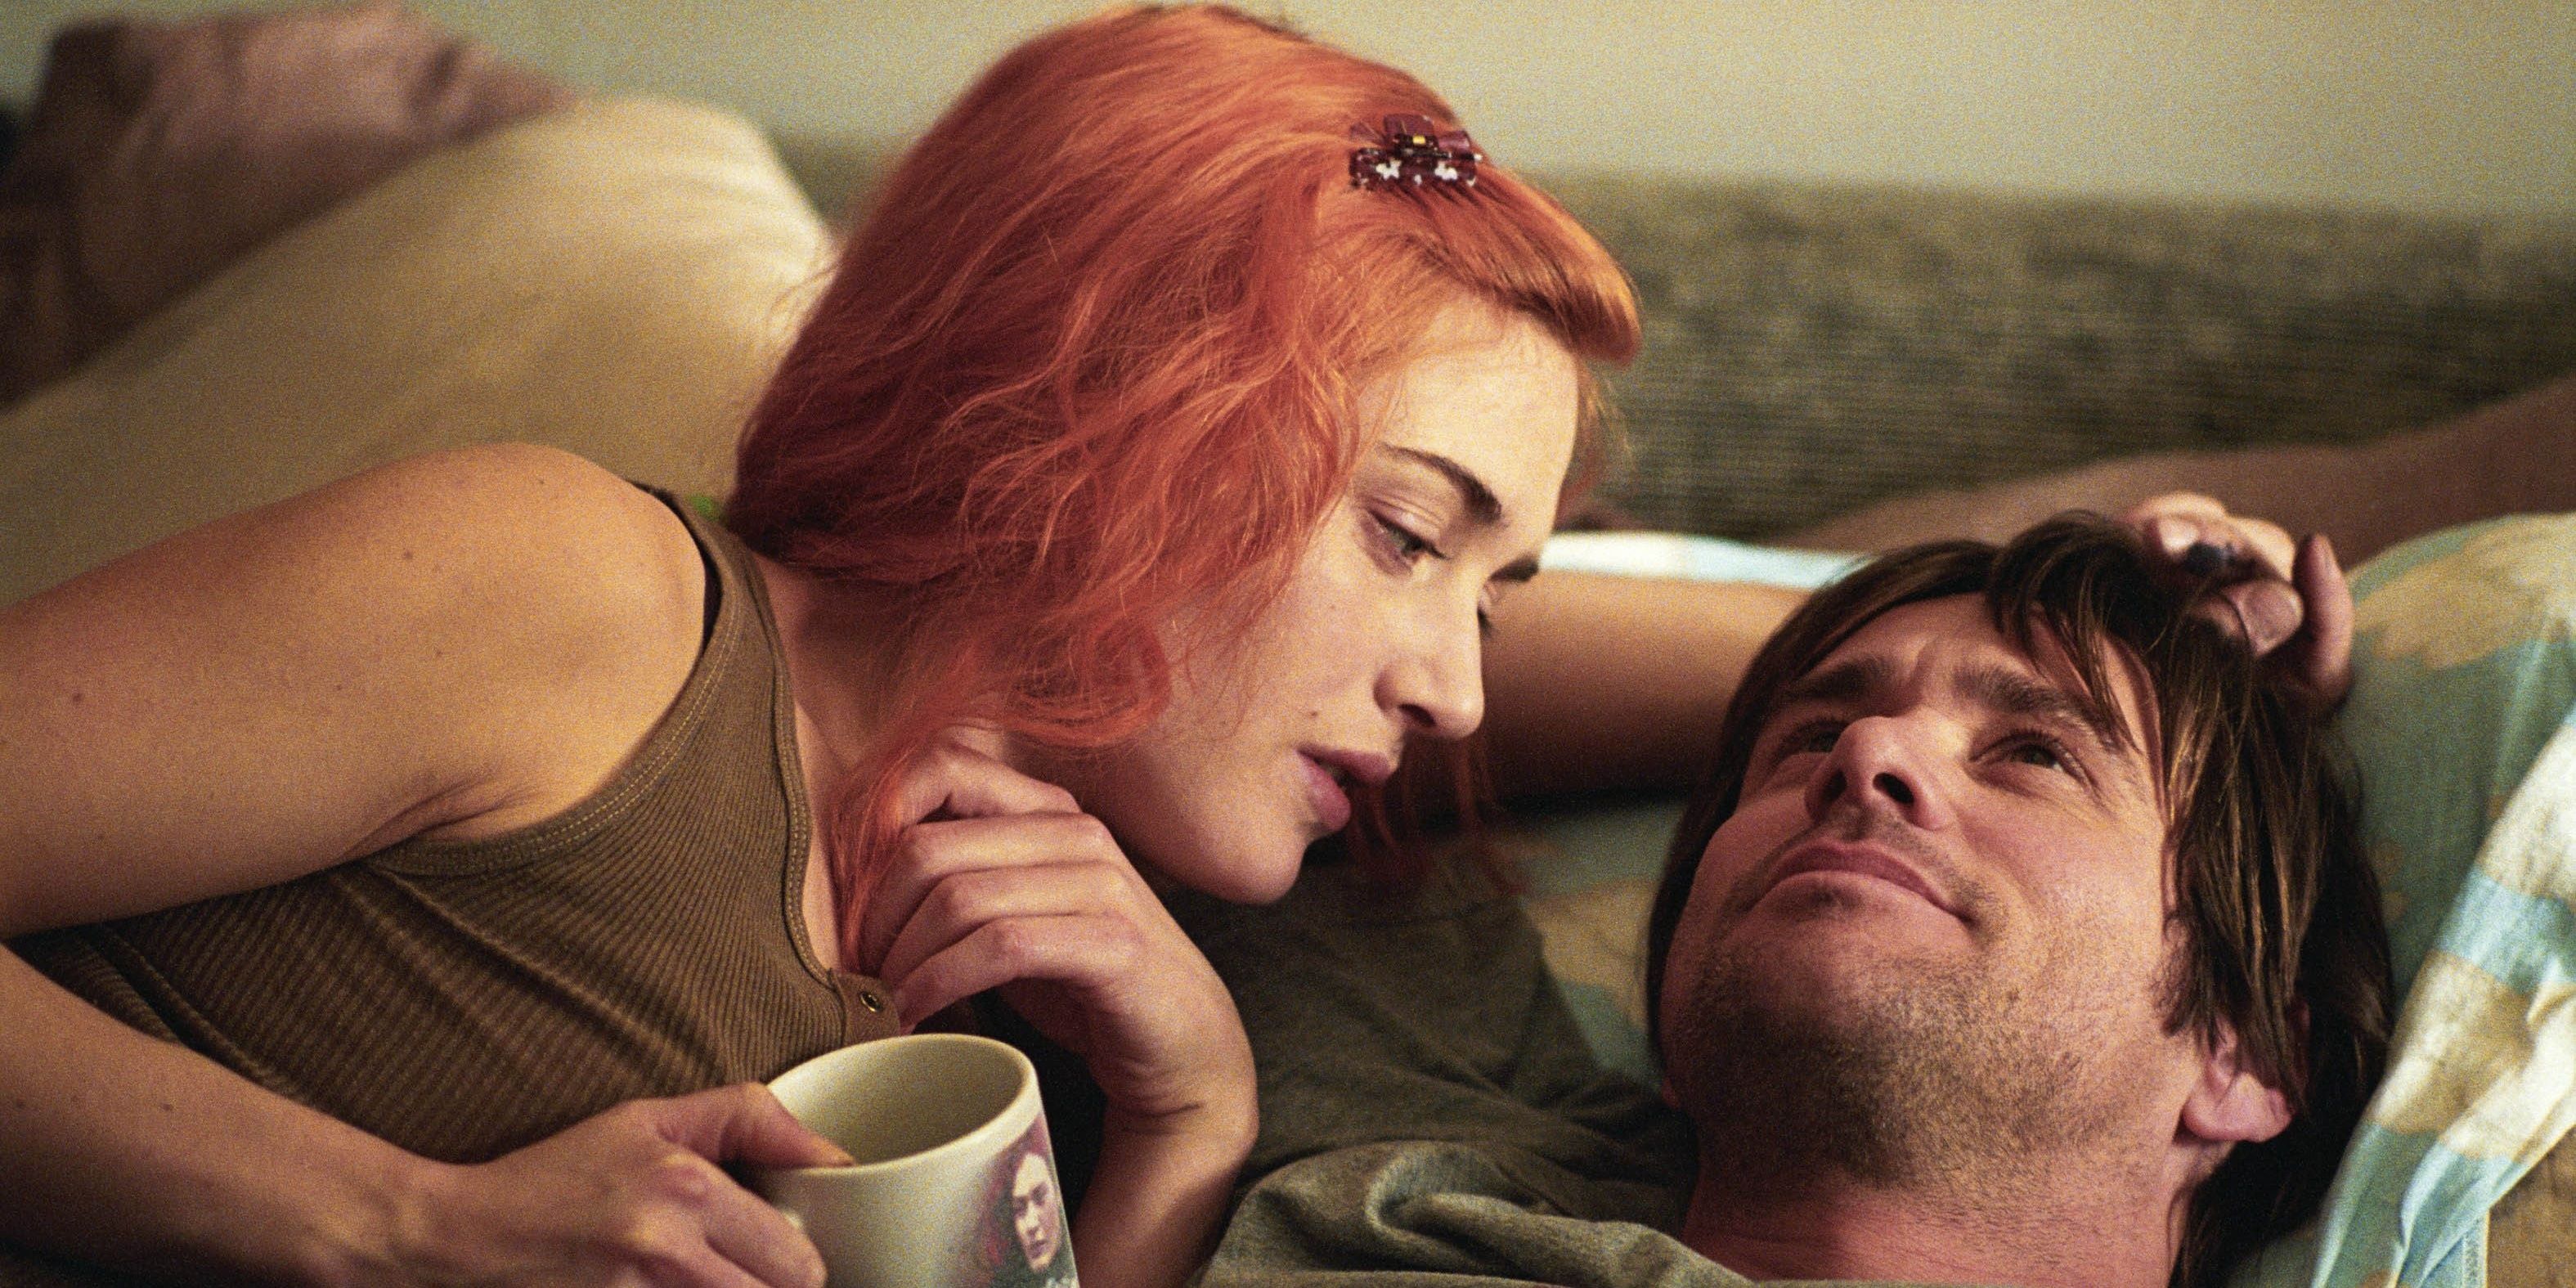 Clementine with coffee lying in bed with Joey in Eternal Sunshine of the Spotless Mind